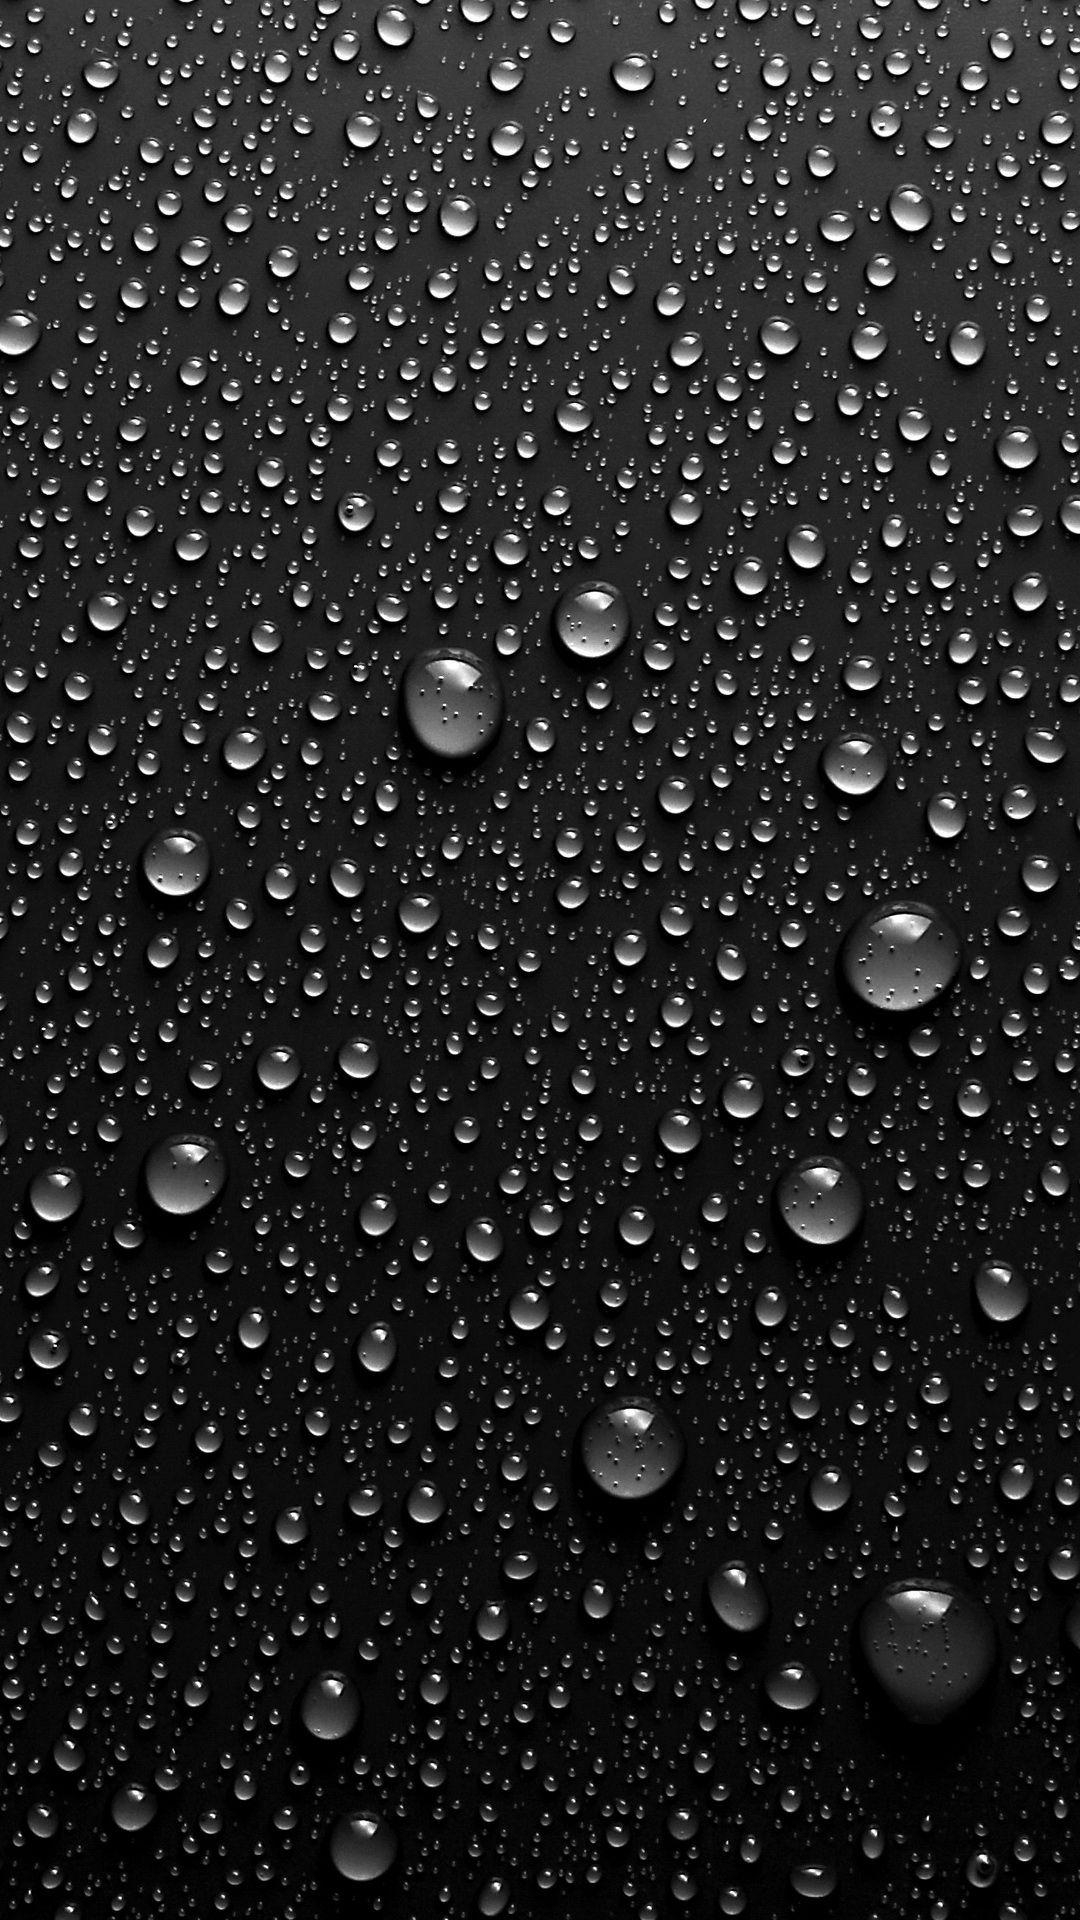 1080x1920 Rain Droplets Wallpapers Top Free Rain Droplets Backgrounds